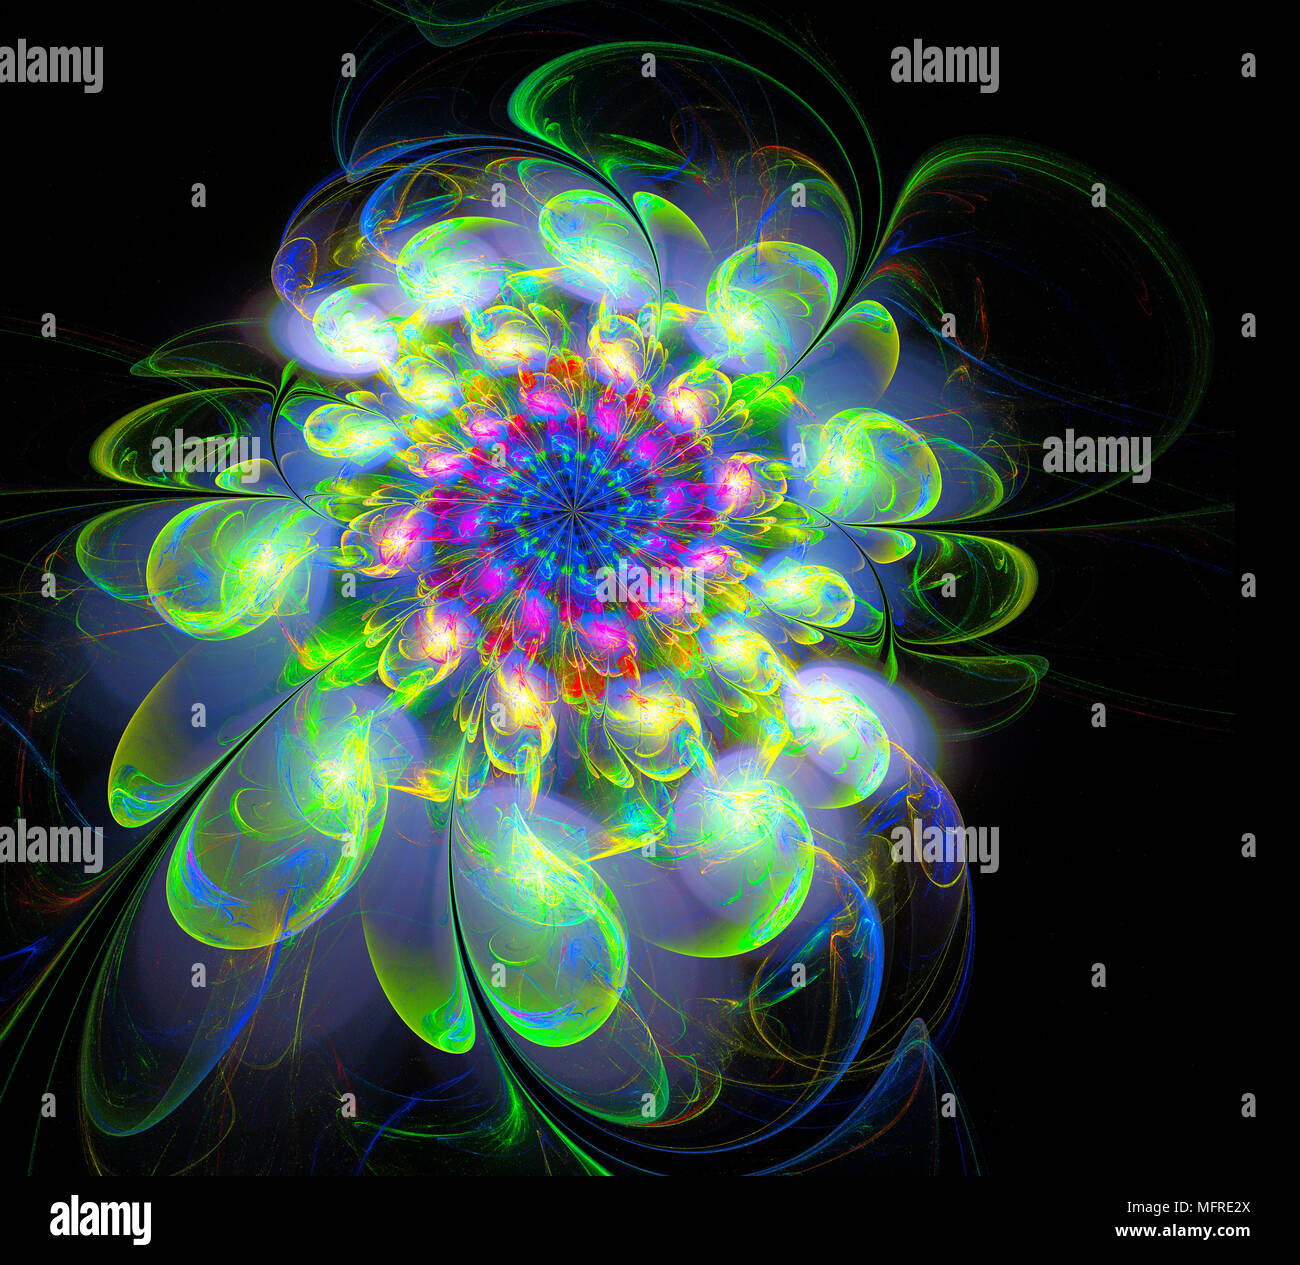 abstract fractal futuristic colourful flower pattern. 3d render illustration of a fractal. art fantasy pattern. digital art design element. abstract p Stock Photo